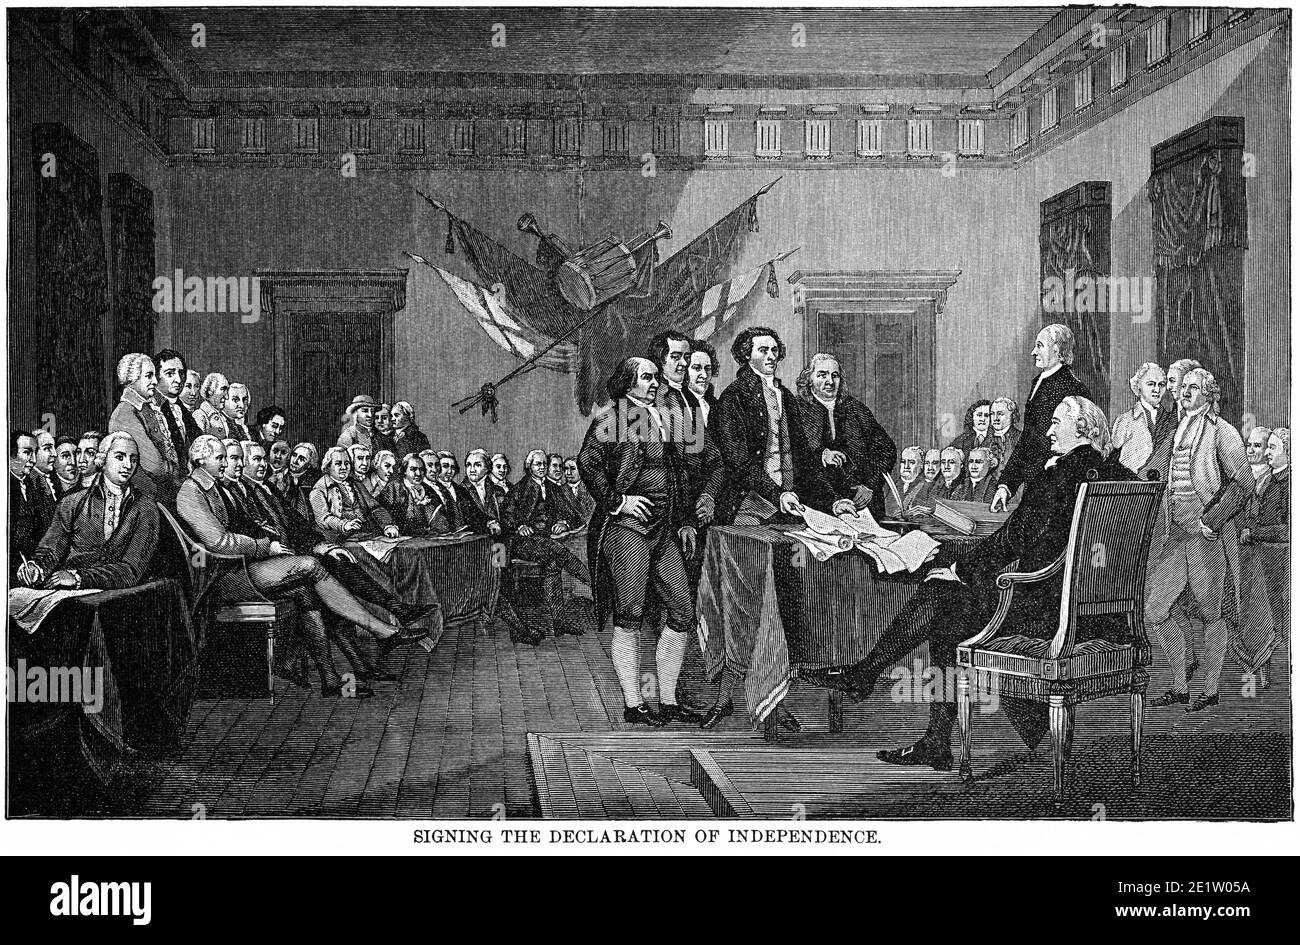 Signing the Declaration of Independence, Illustration, Ridpath's History of the World, Volume III, by John Clark Ridpath, LL. D., Merrill & Baker Publishers, New York, 1897 Stock Photo